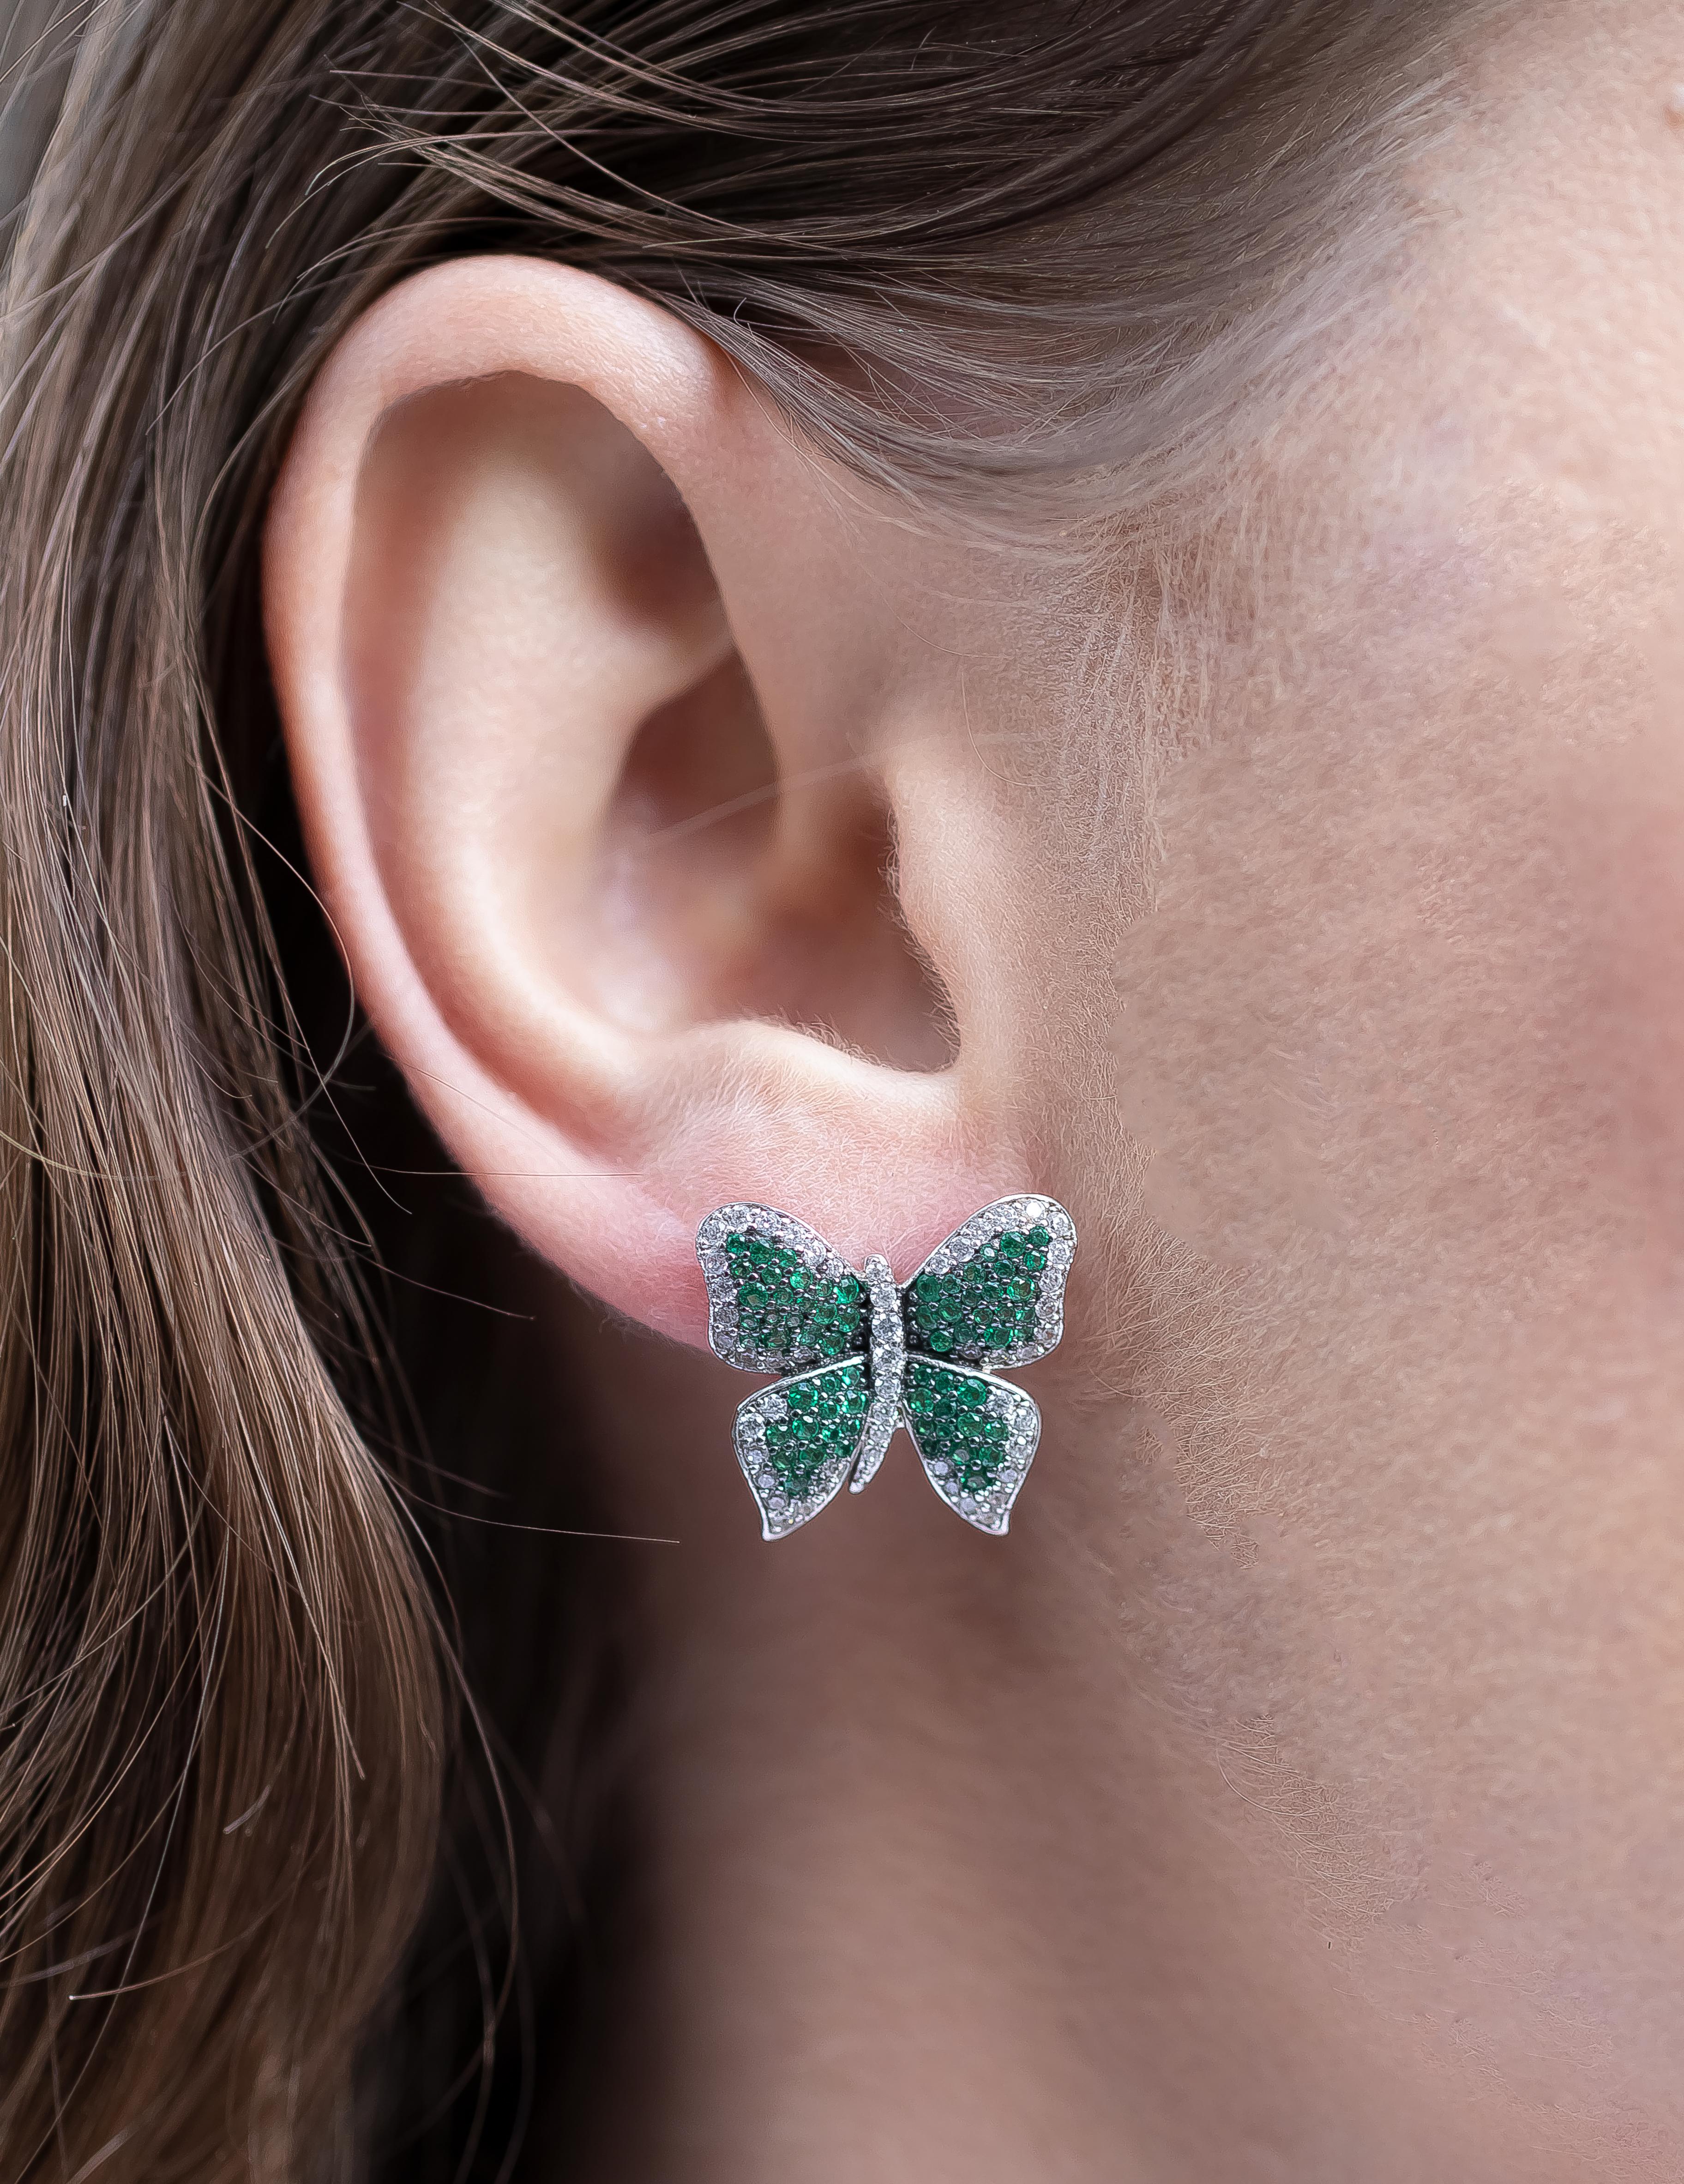 Butterfly Earrings 
Gemstone: Very Fine Cubic Zirconia
Metal: Rhodium Finish Sterling
Style: French